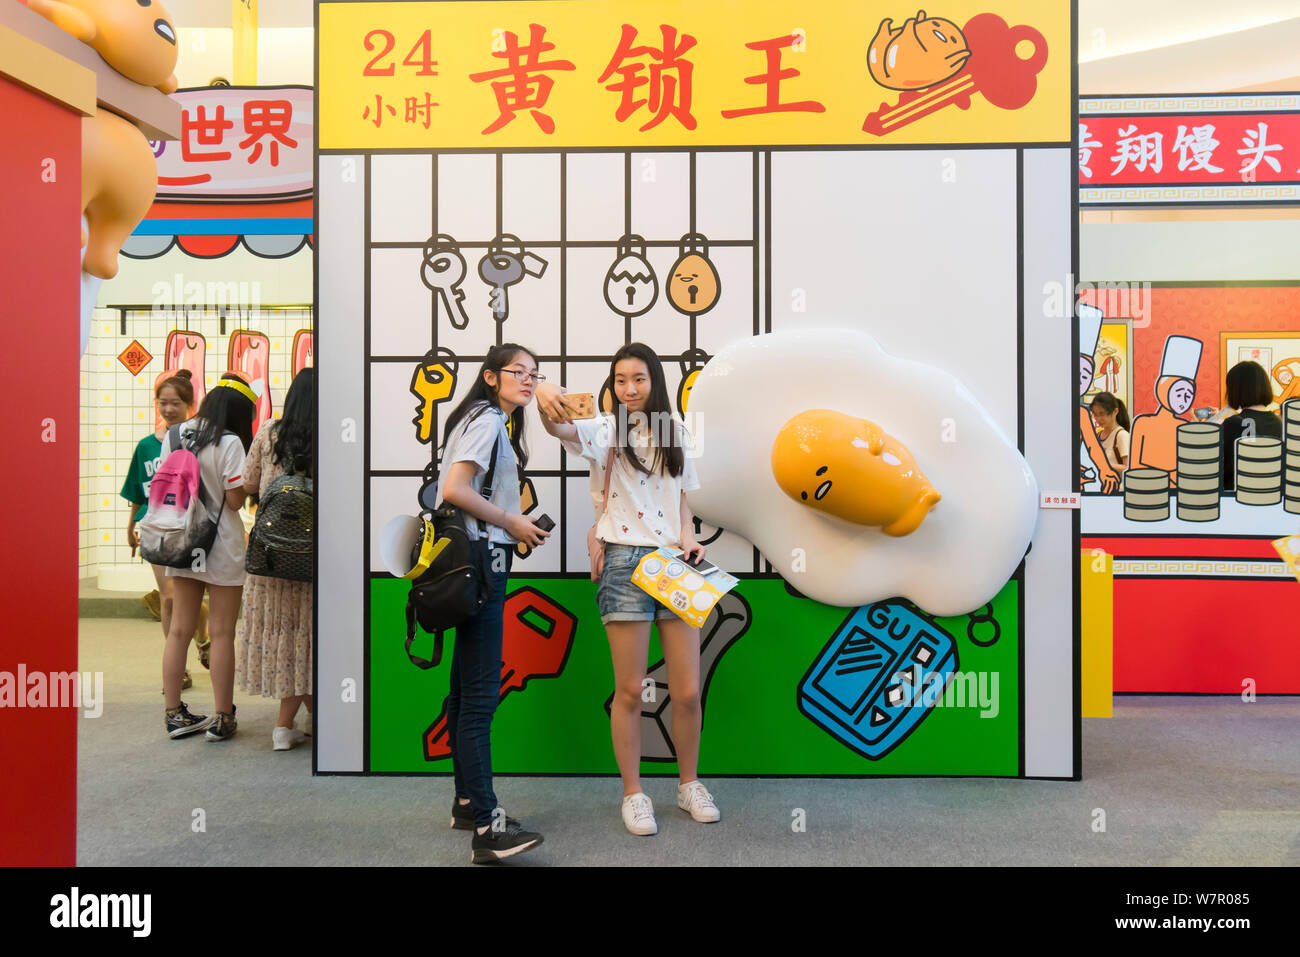 Cartoon enthusiasts take selfies with Gudetama, or lazy egg, created by Hello Kitty's developer Sanrio, in Shanghai, China, 19 June 2017.   The Japane Stock Photo